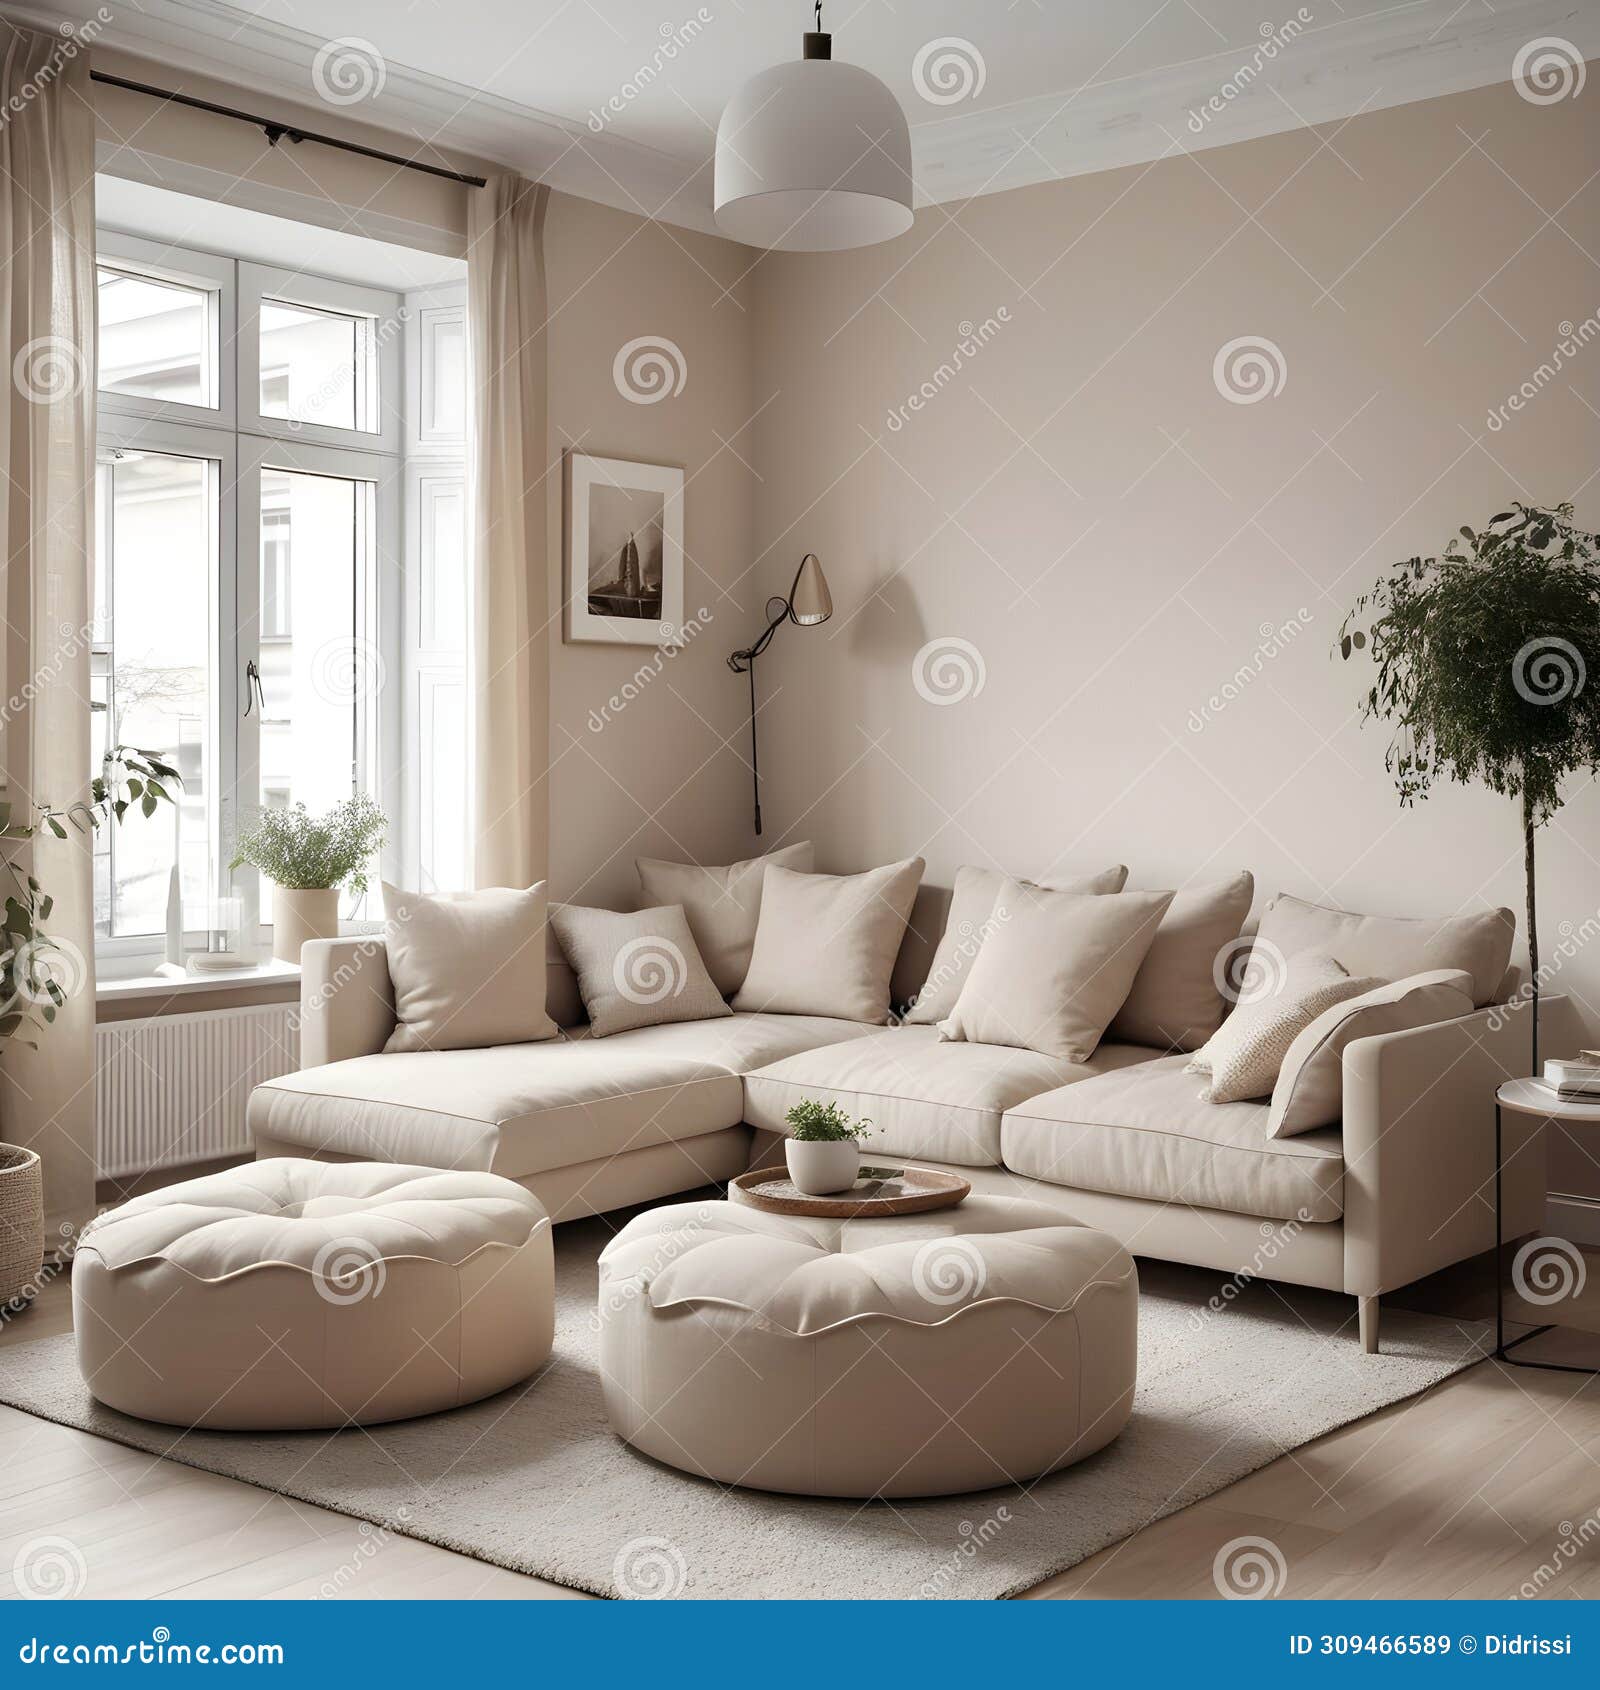 a classic apartment with a beige corner sofa and poufs